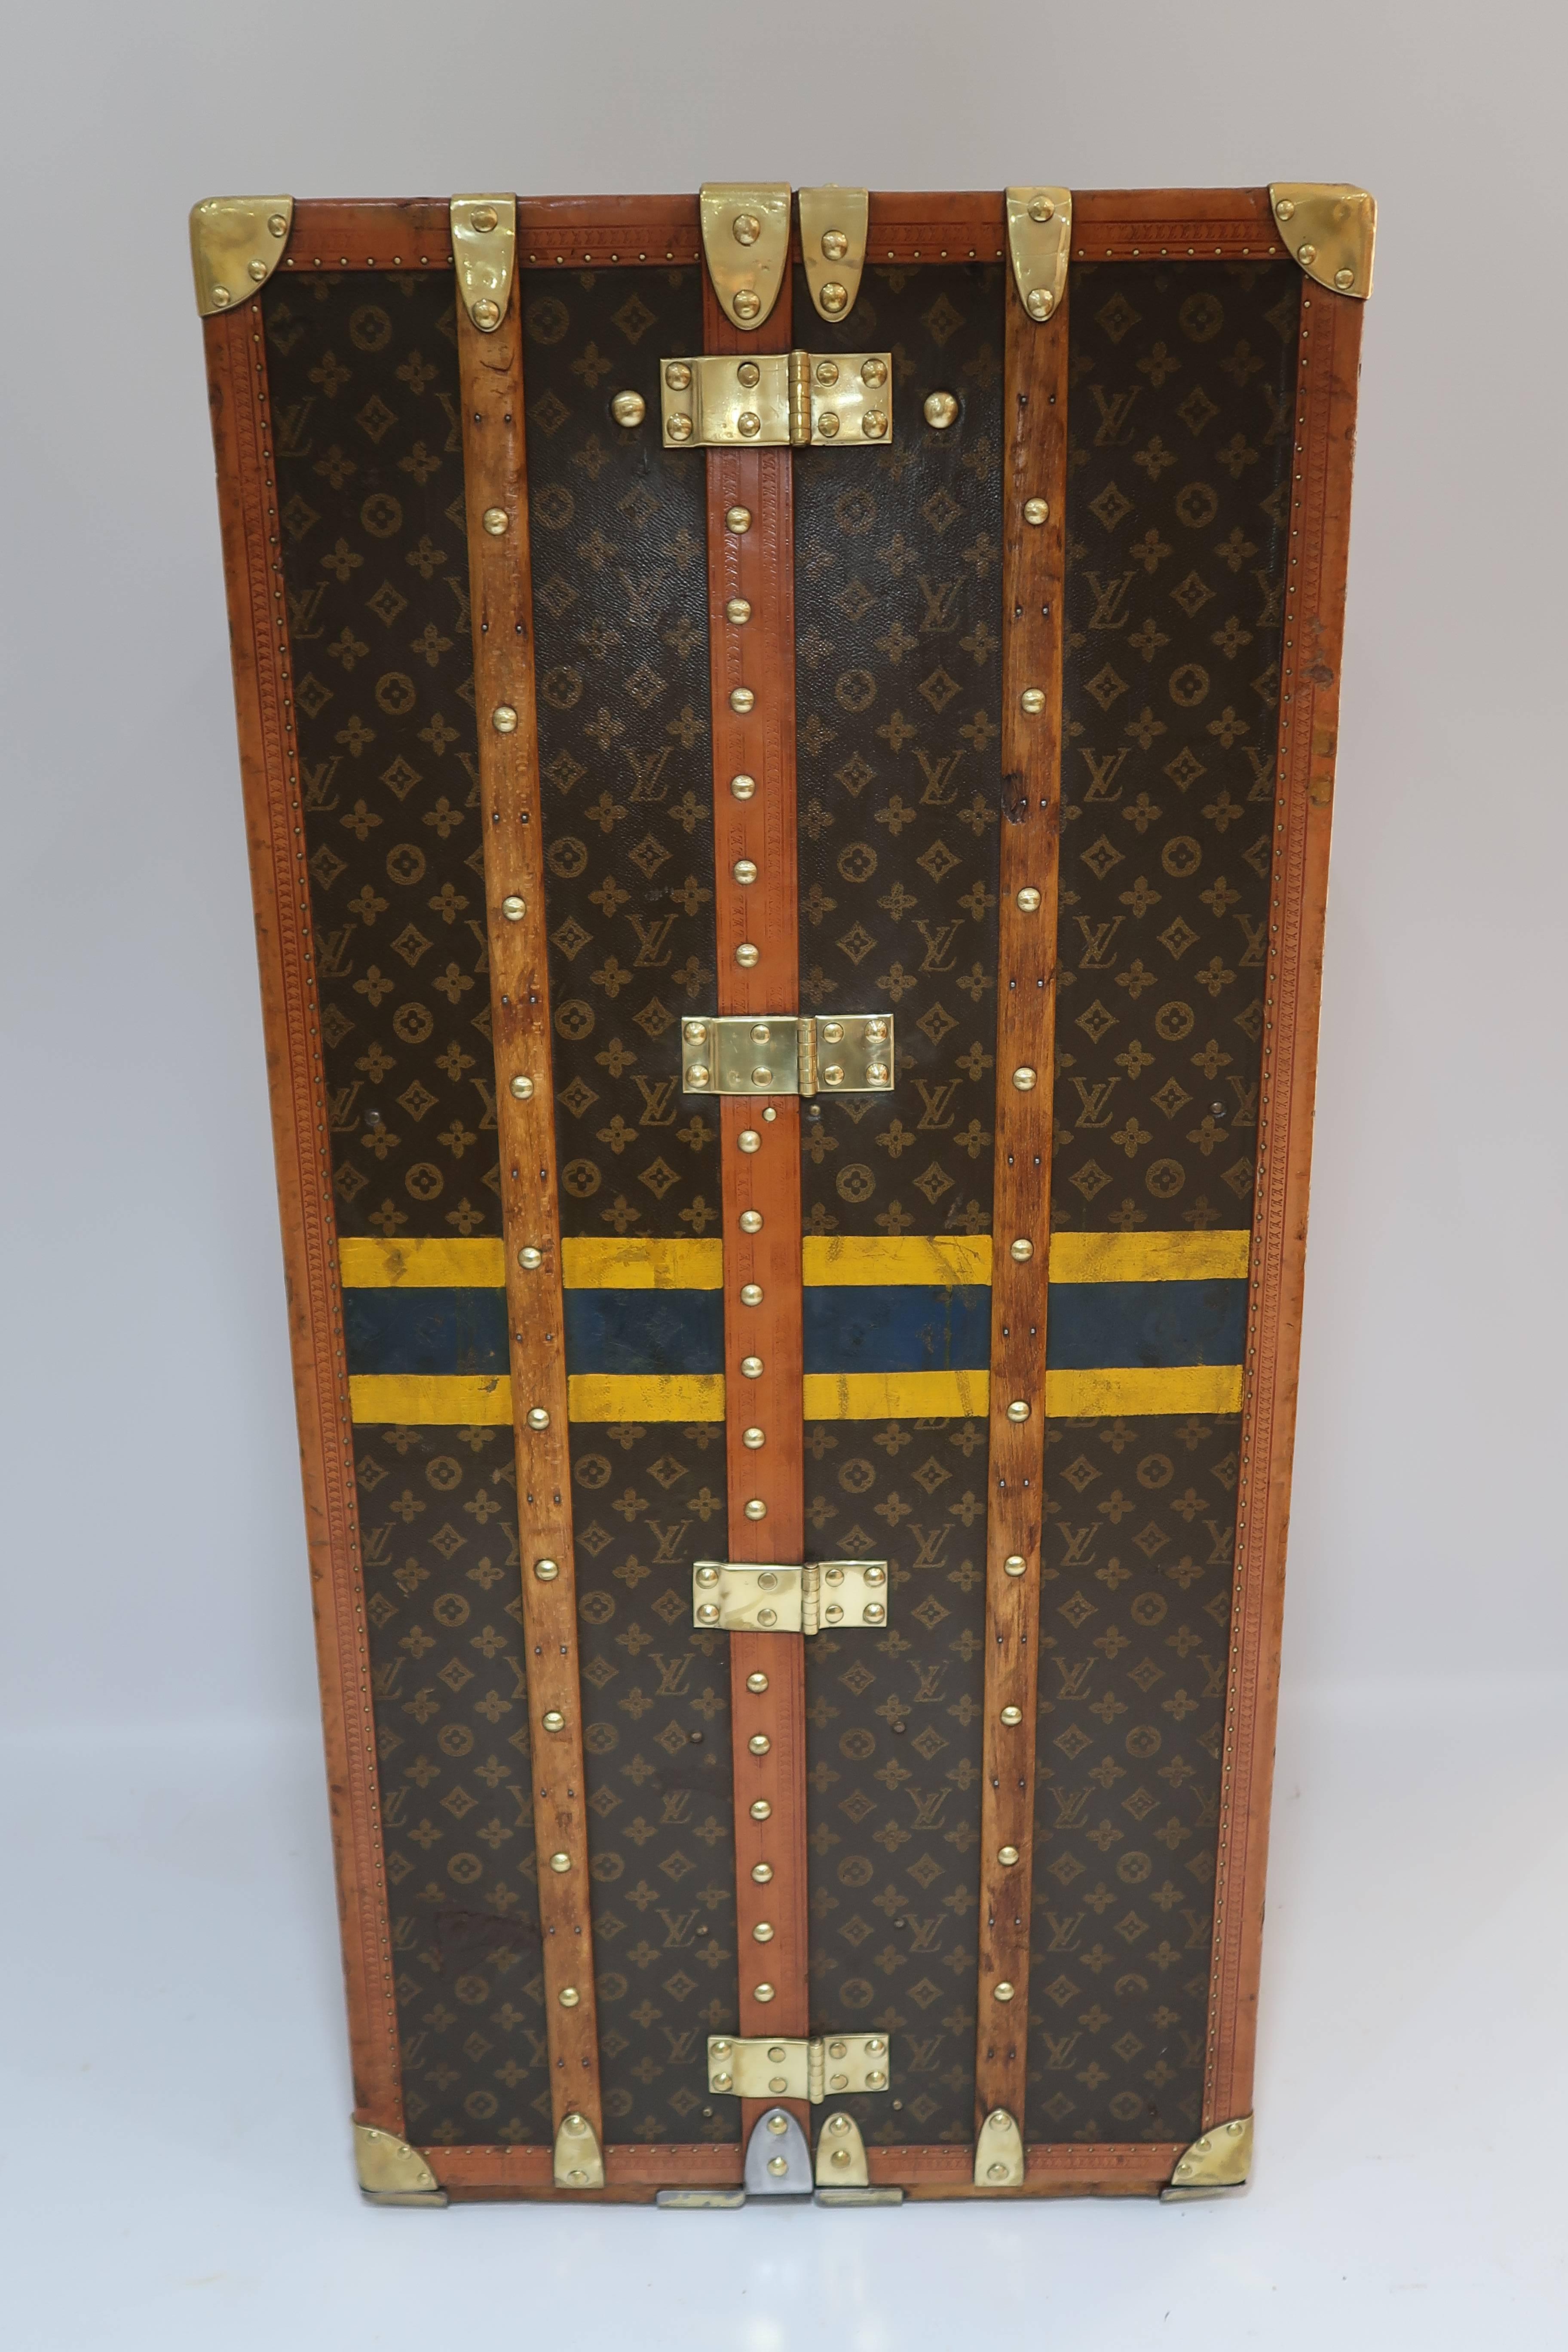 For sale a highly desirable antique wardrobe trunk by Louis Vuitton, with brass hardware, complete interior, monogram canvas, LV stamped lozine trim and stamped pins.

A collectible piece over 100 years old perfect for collectors or for decoration.